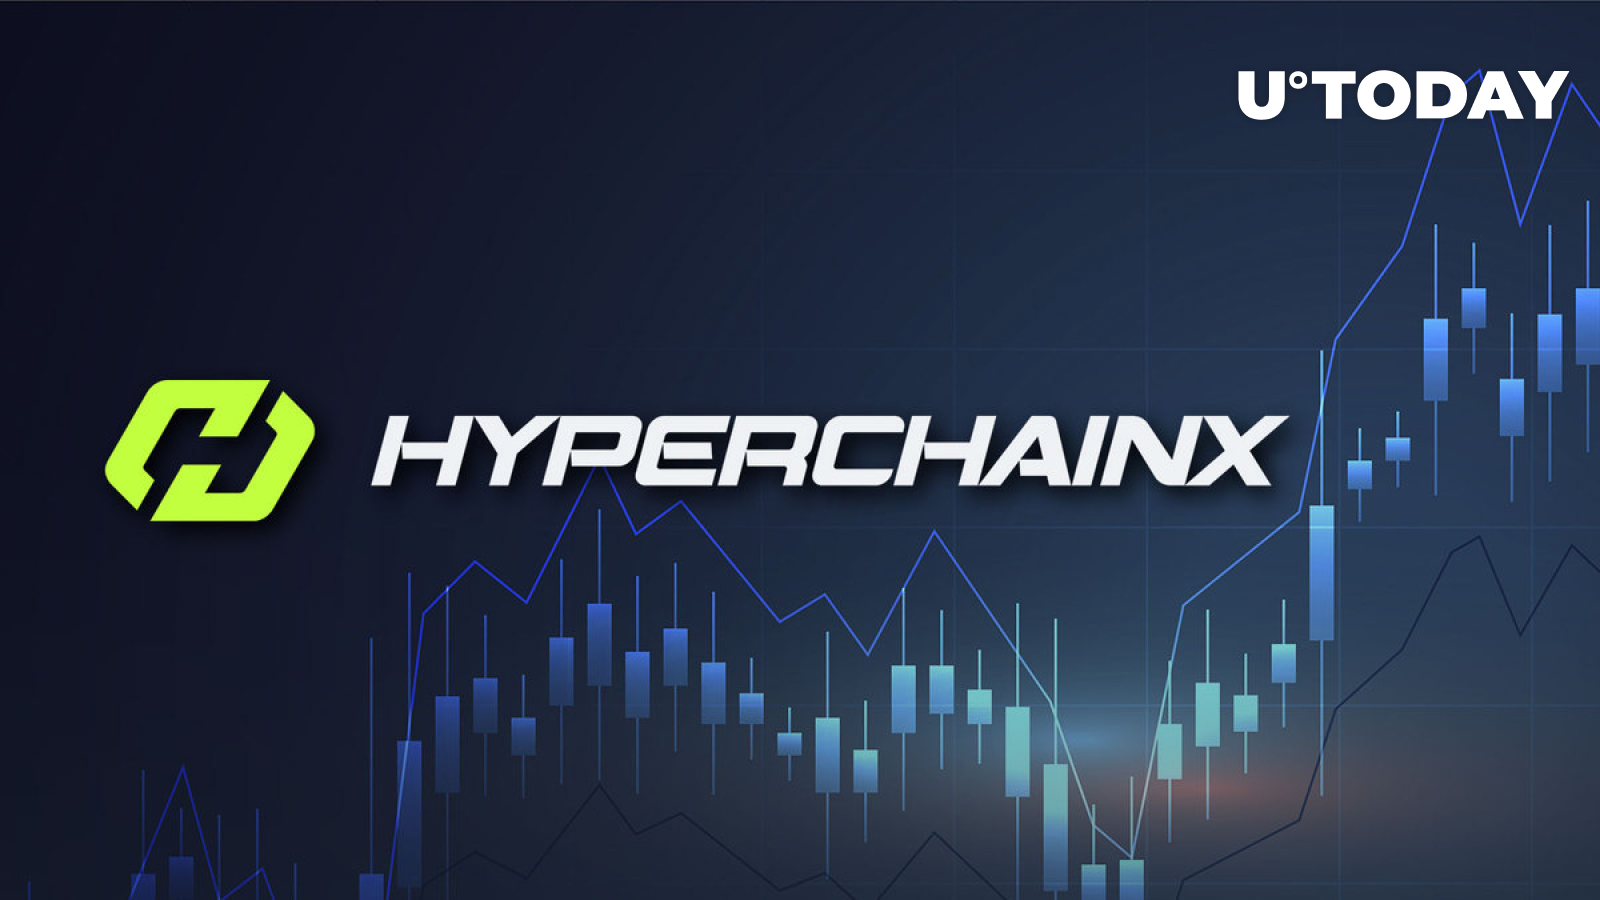 HyperChainX (HYPER) up 175%, Here’s Why This Token Is Trending